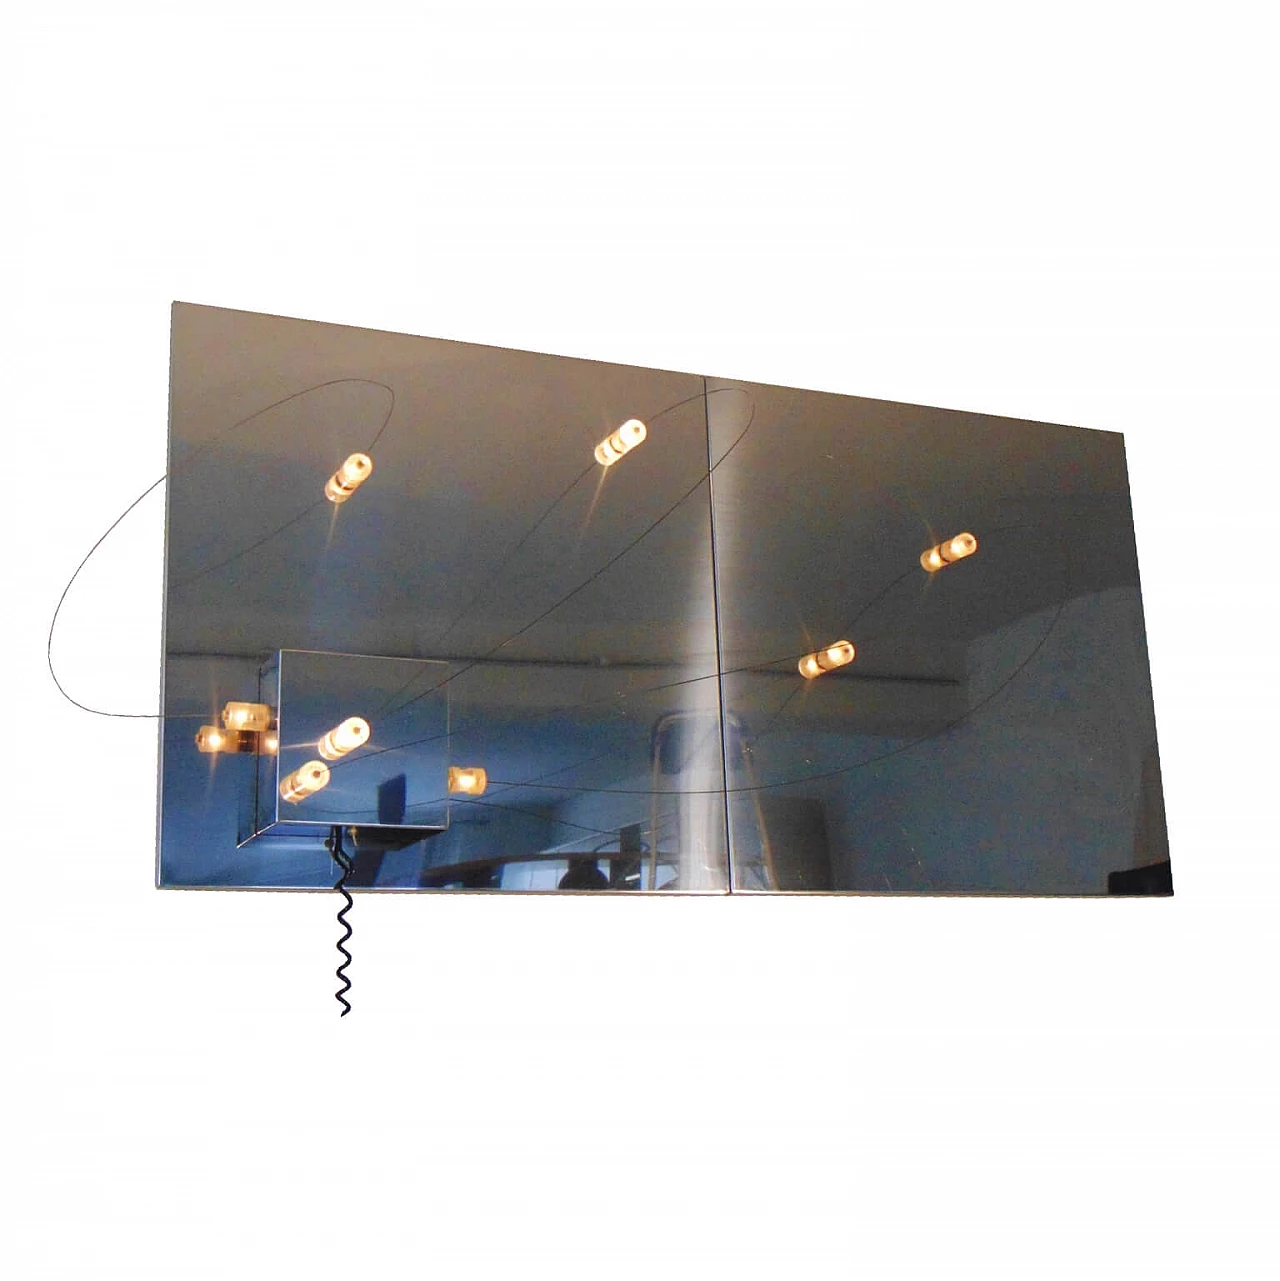 Mirrored Wall Lamp with Magnetic Movable Lights by ARDITI, Sormani Nucleo, Italy 1070016